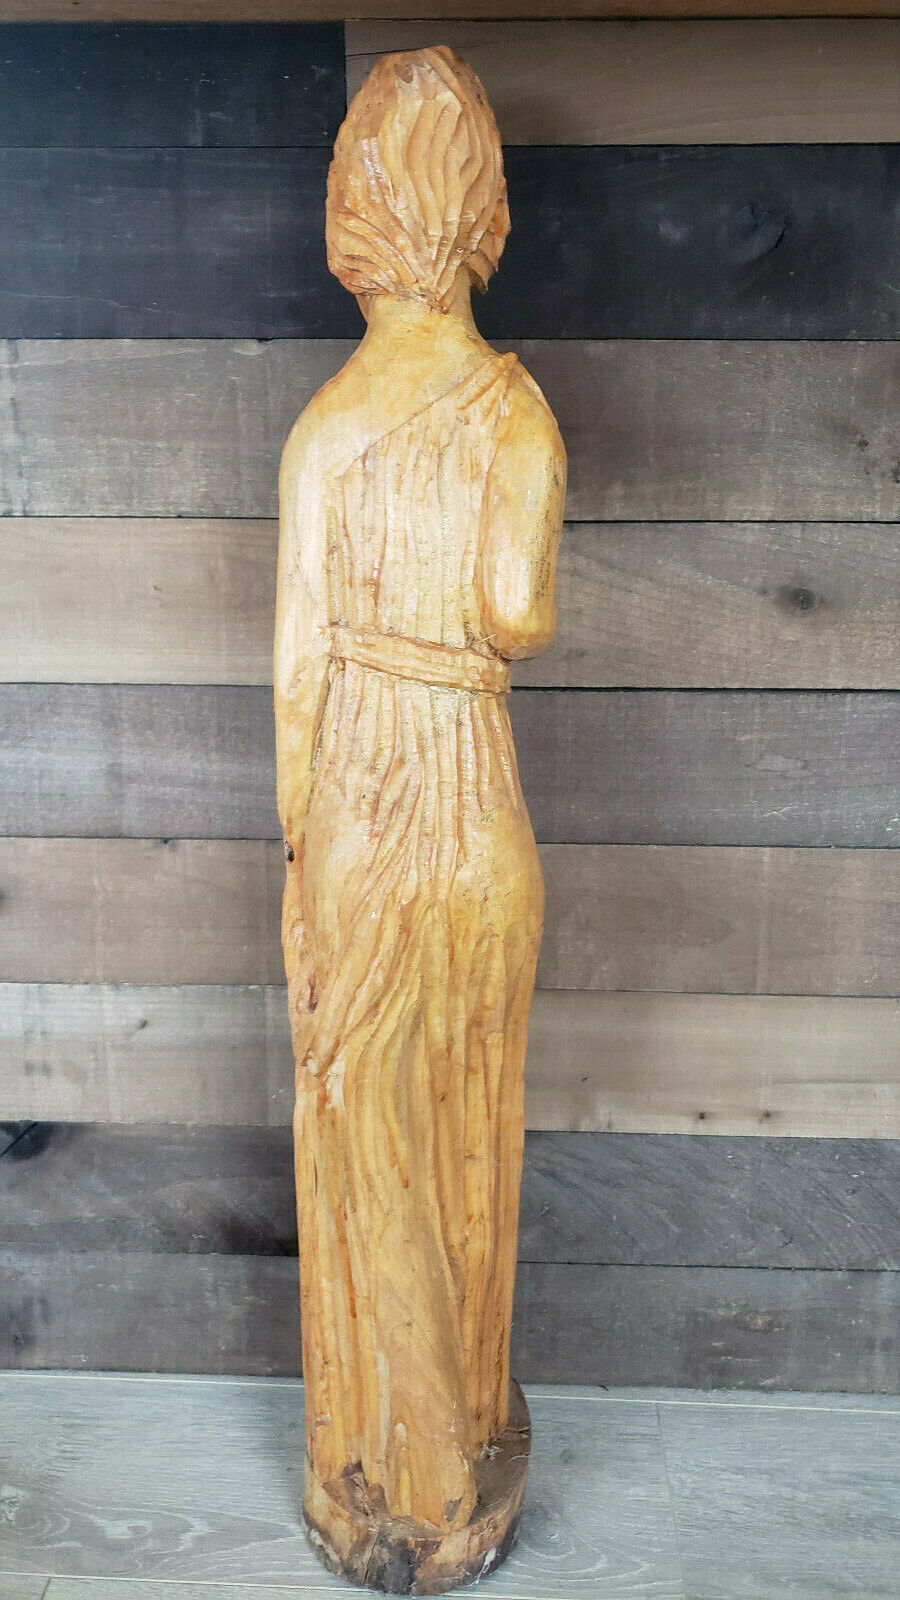 Rare Vintage Handcarved Wooden Statue of a Woman Holding Her Breast. 34" Без бренда - фотография #5